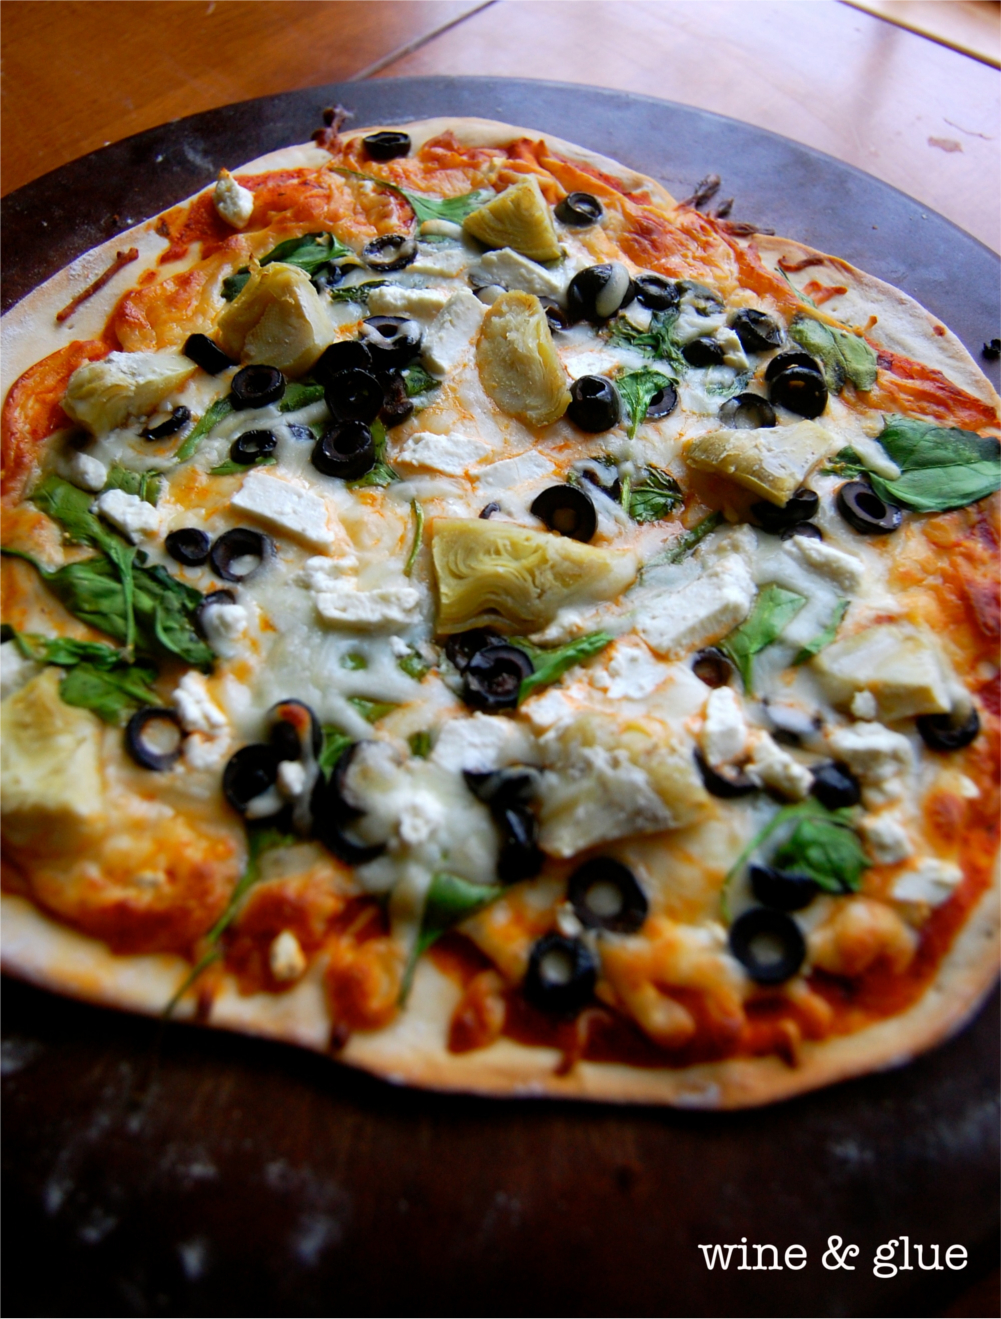 The Spinach Artichoke Pizza that is fully cooked with a brown crust and melted cheese toppings. 